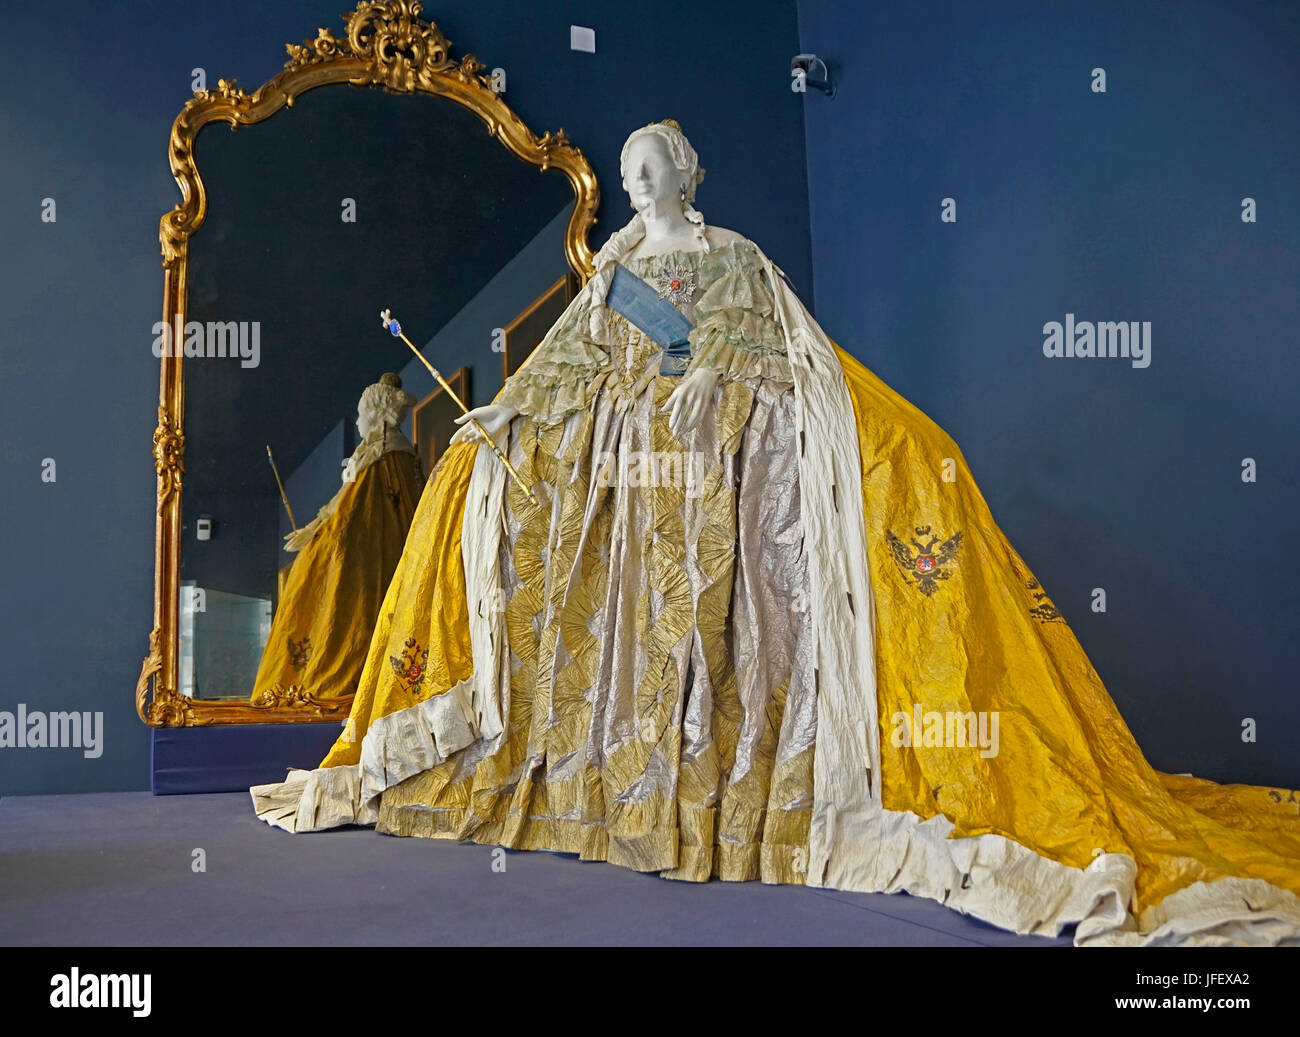 Gown of Catherine the Great on display at Catherine's Palace at Pushkin ...